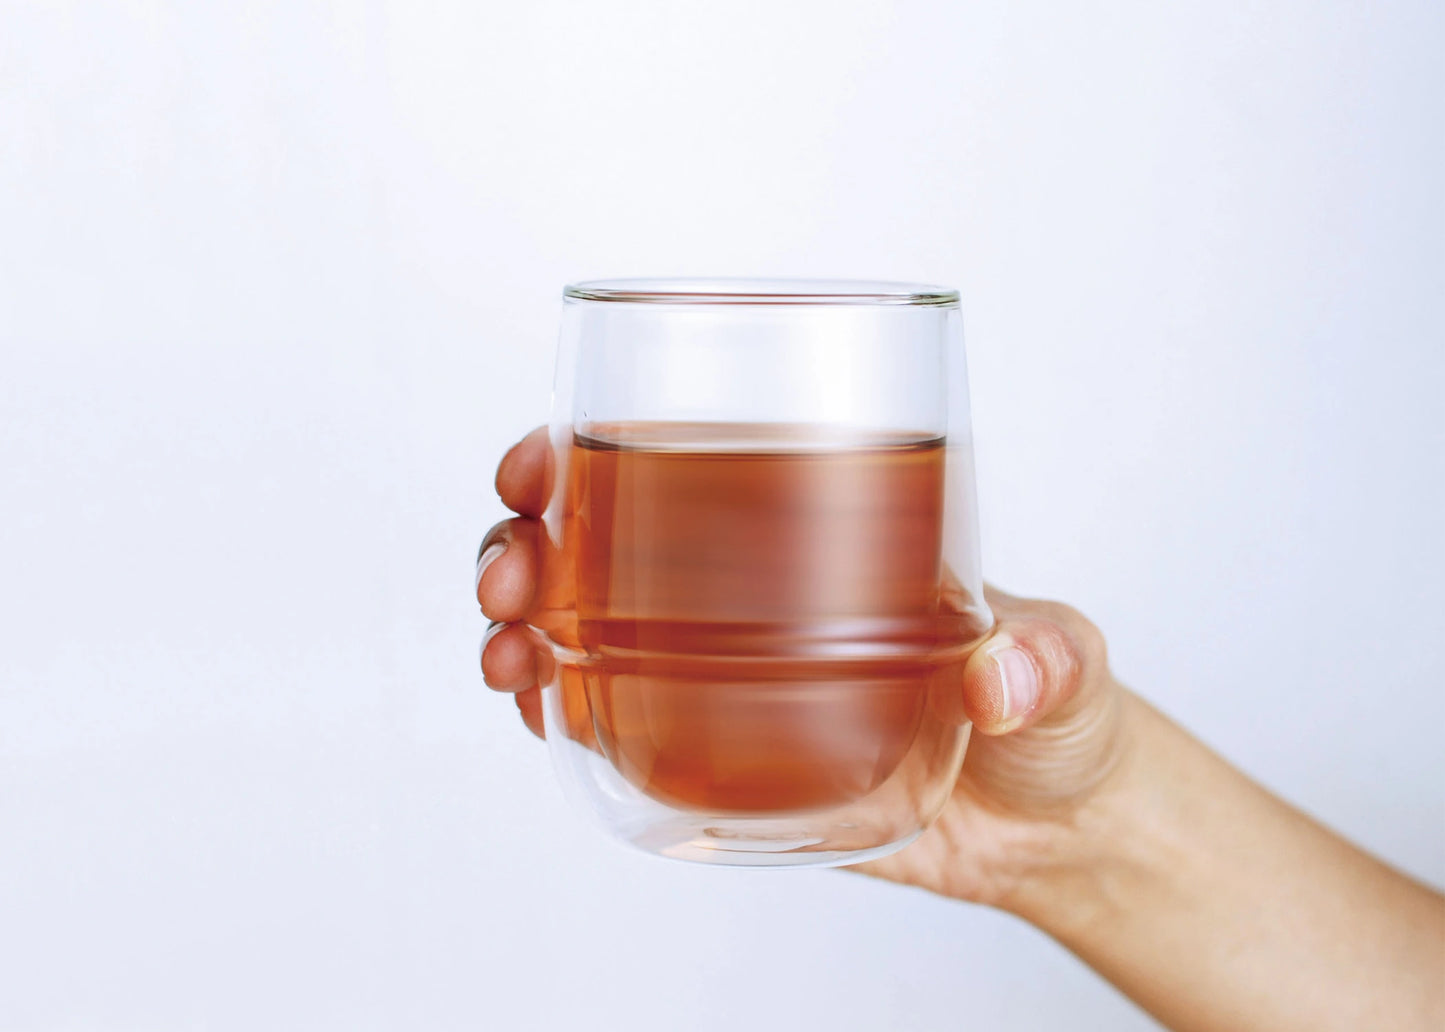 KRONOS Double Wall Ice Tea Cup by KINTO